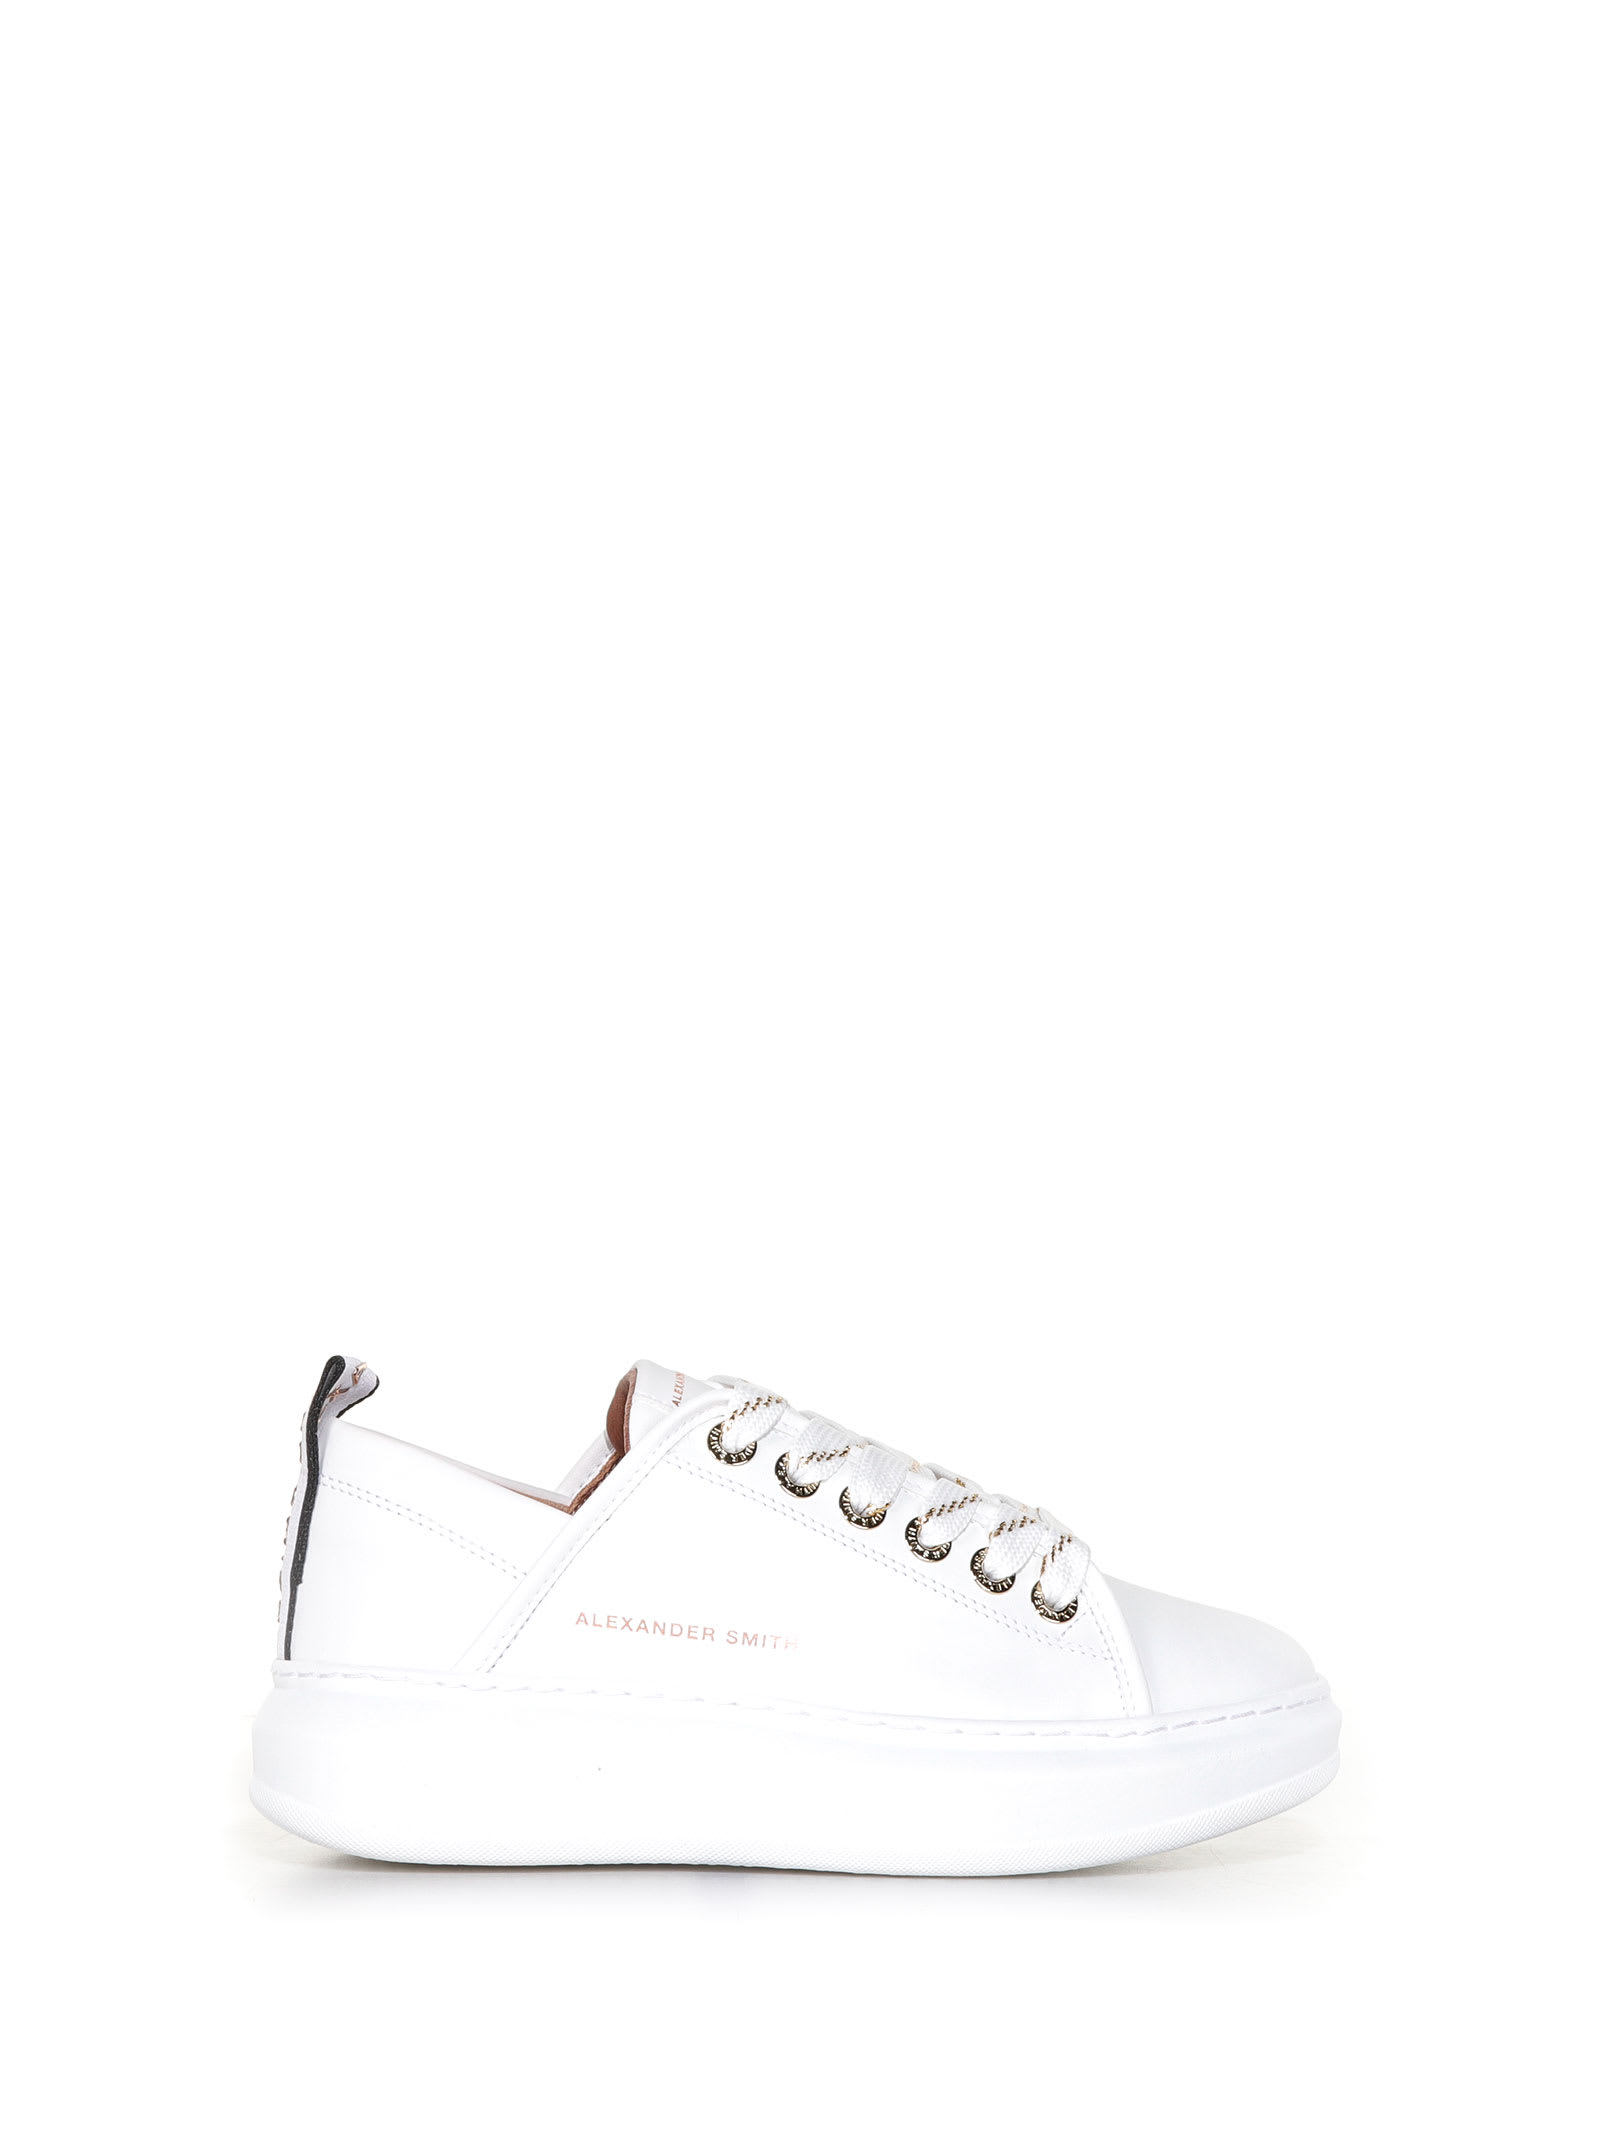 Alexander Smith Leather Sneakers In White Gold